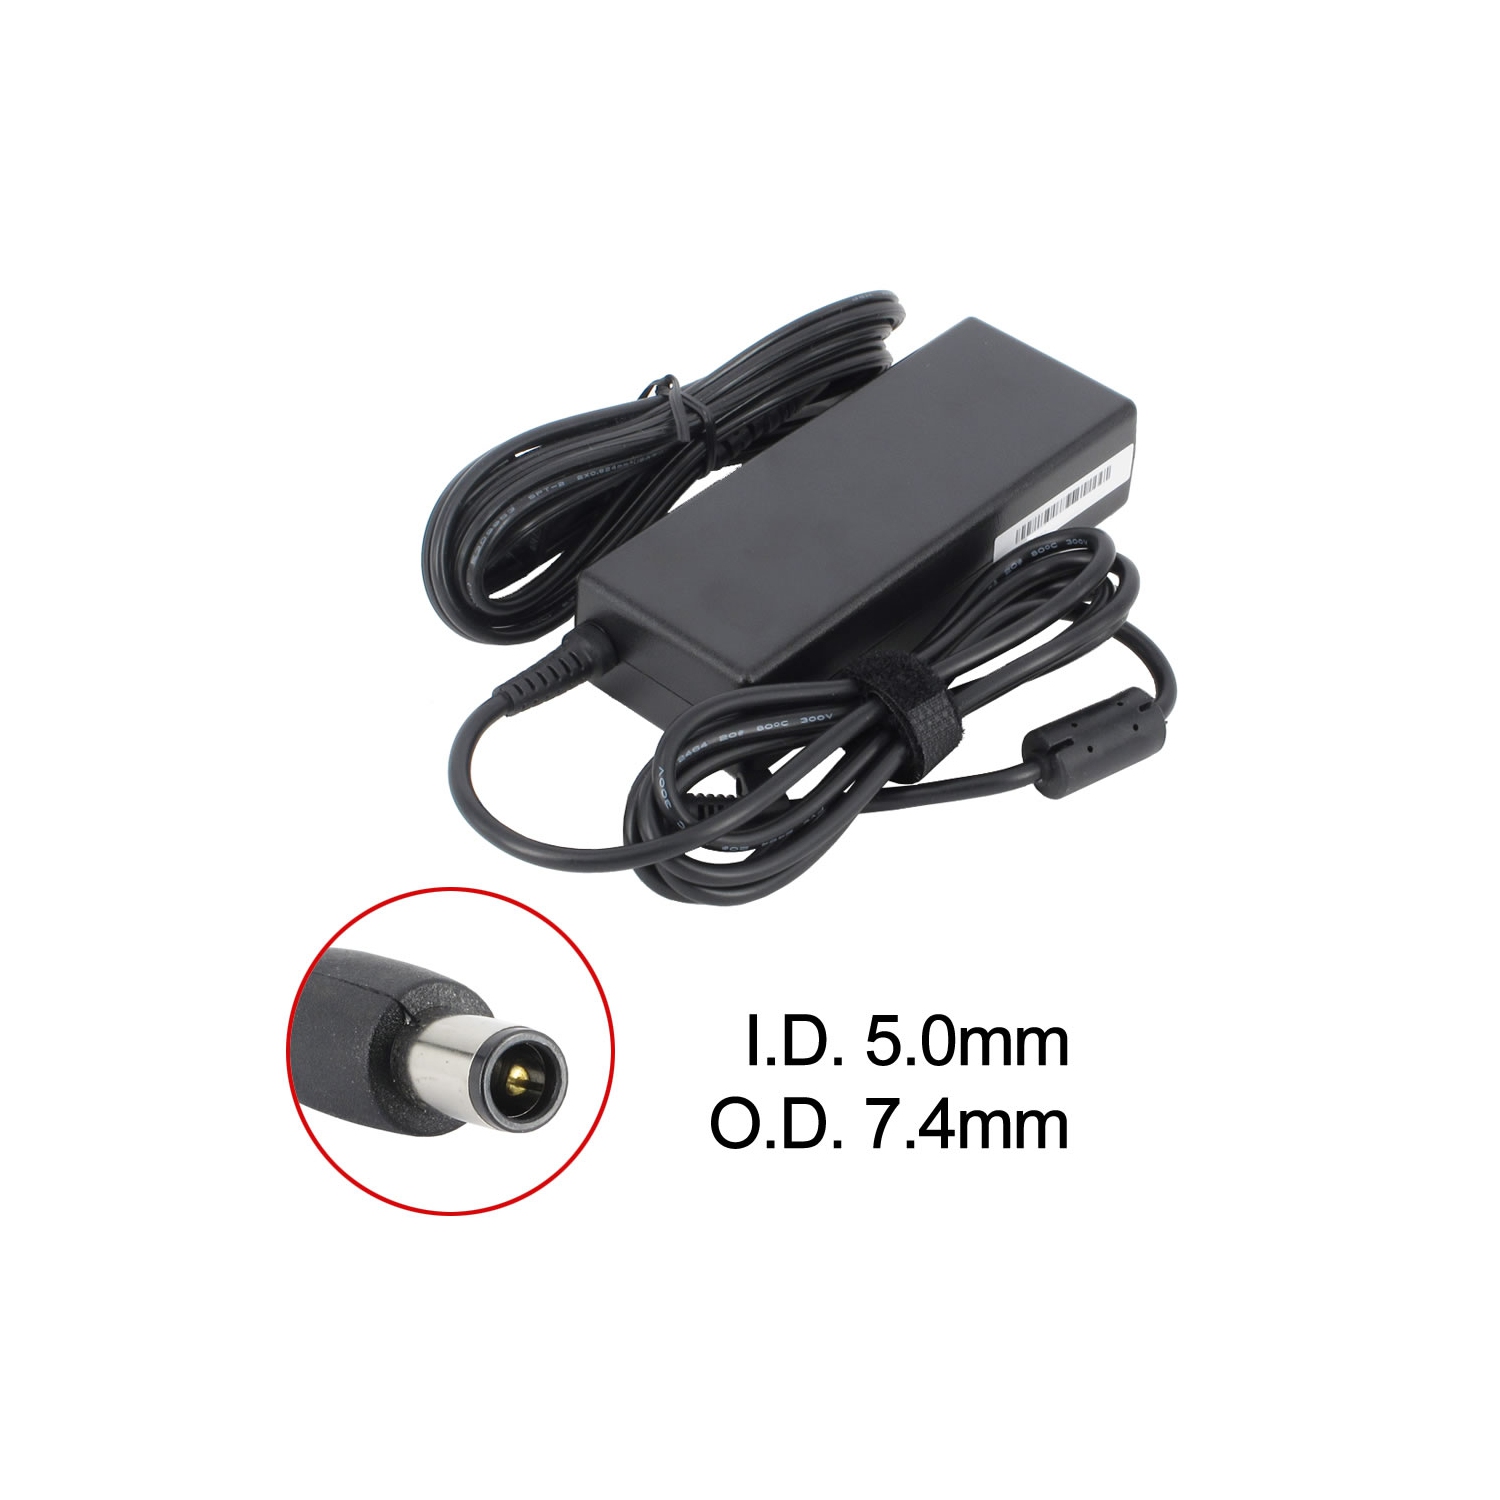 New Laptop AC Adapter for HP ProBook 4440s, 412786-001, 463554-003, 609948-001, HP-AP091F13P SELF, PPP014L-SA